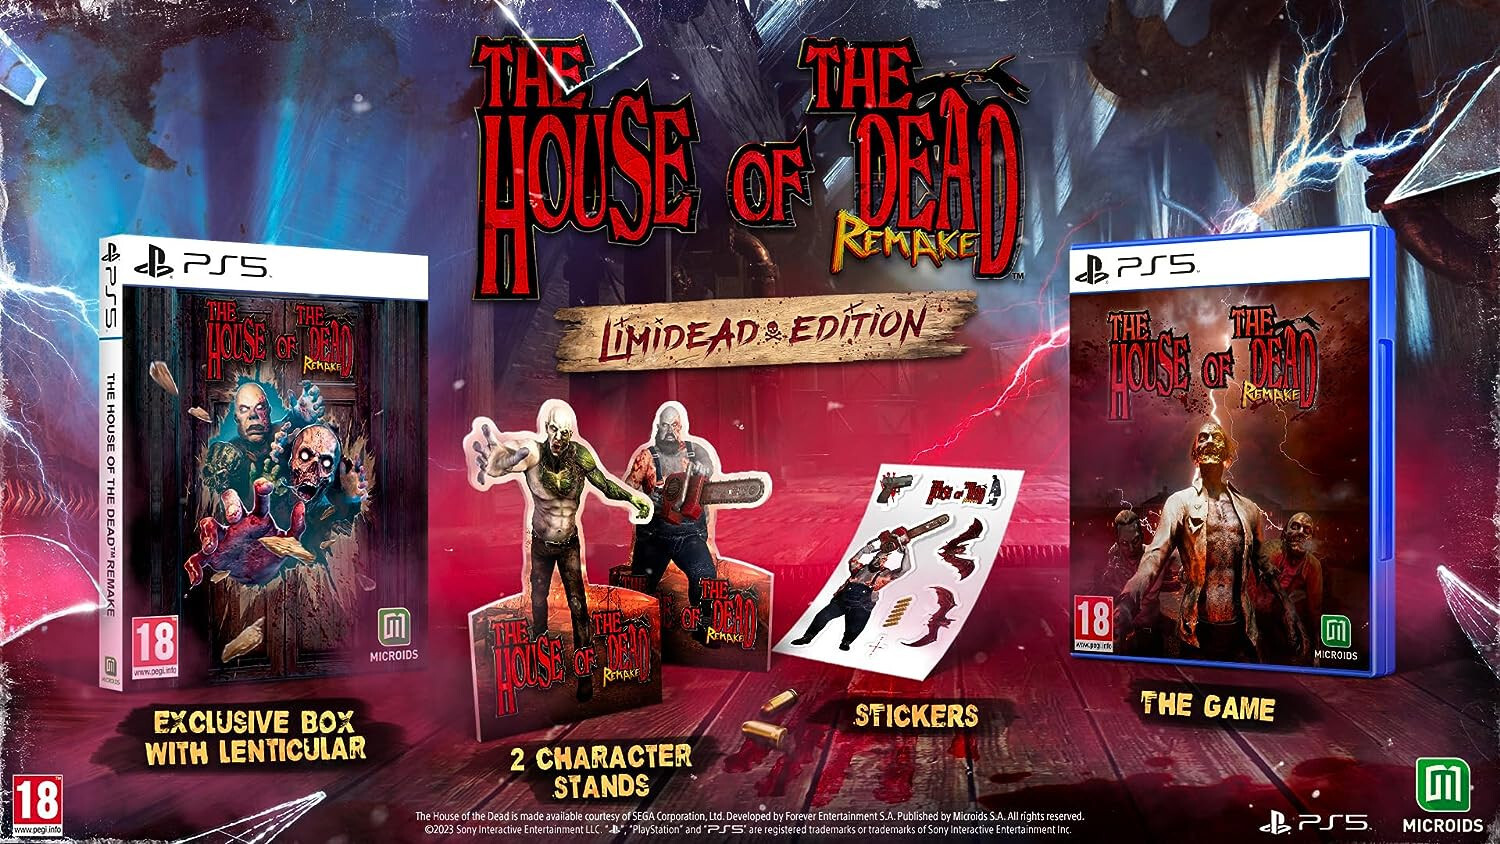 Microids the house of the dead remake: limidead edition